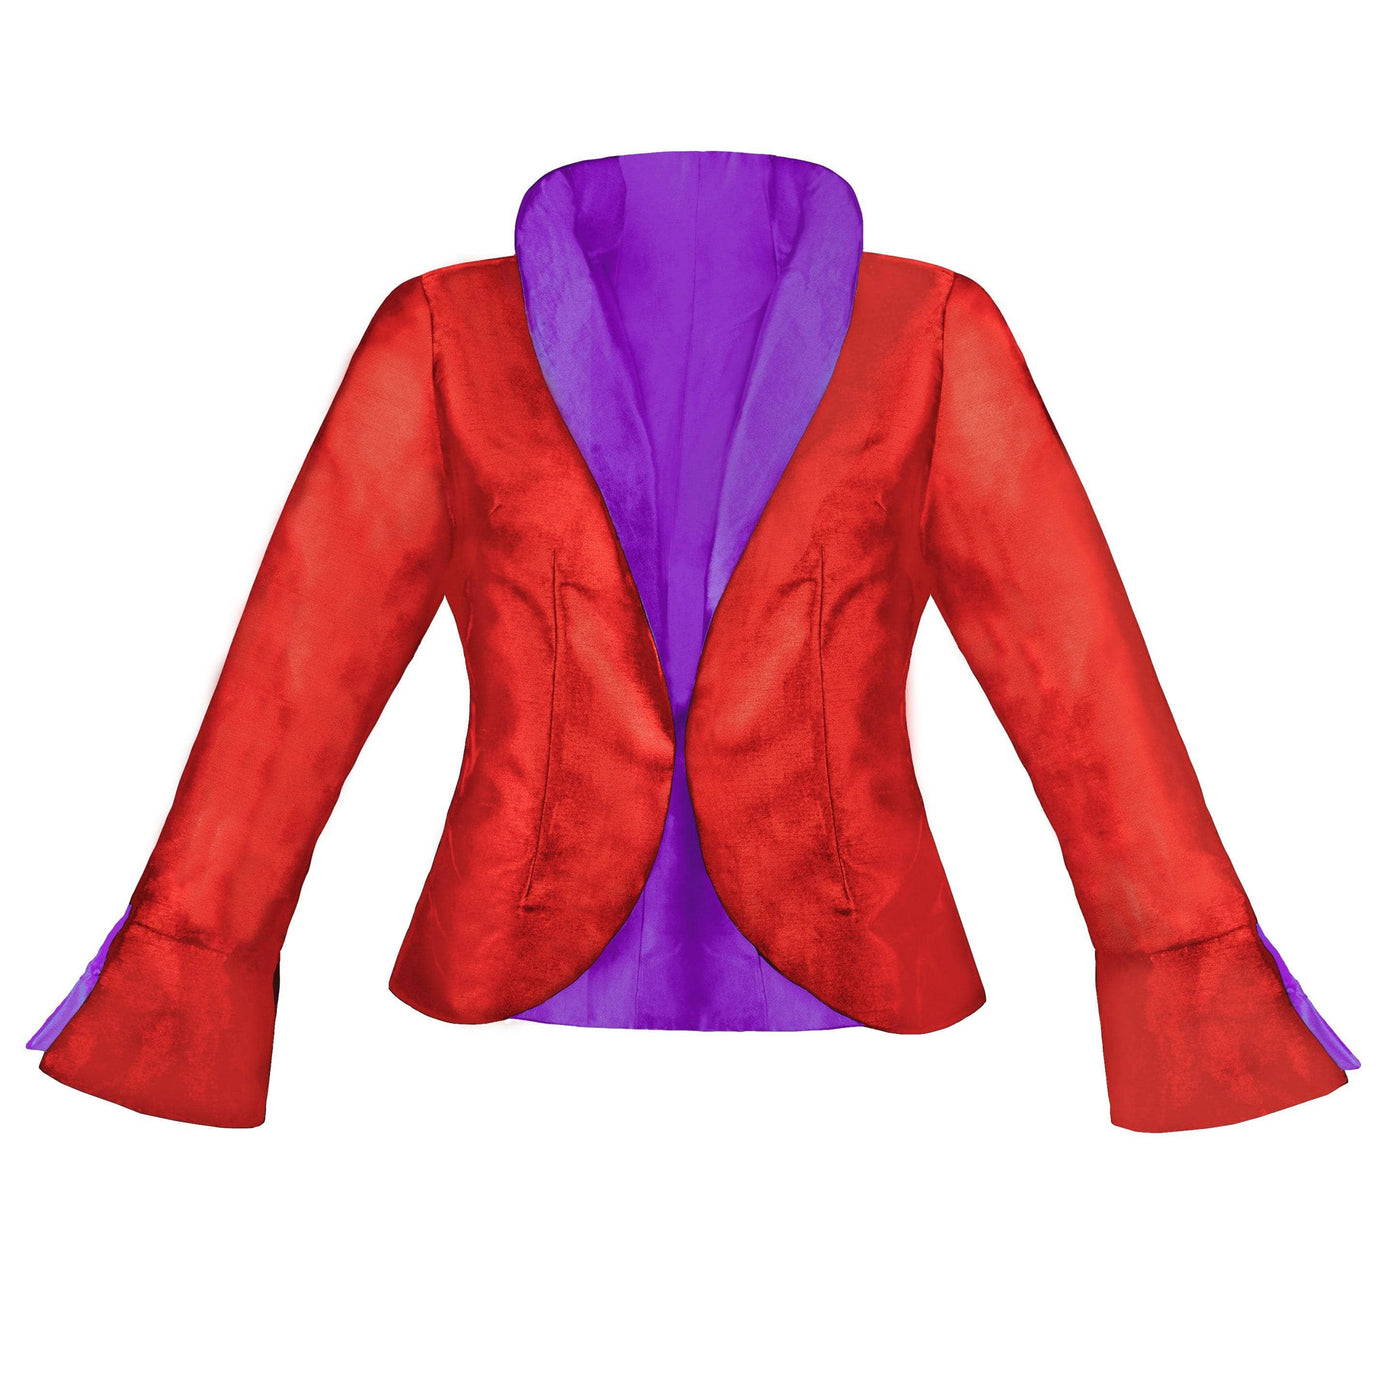 Heidi Daus® "Luxe Be A Lady" Signature Reversible Blazer